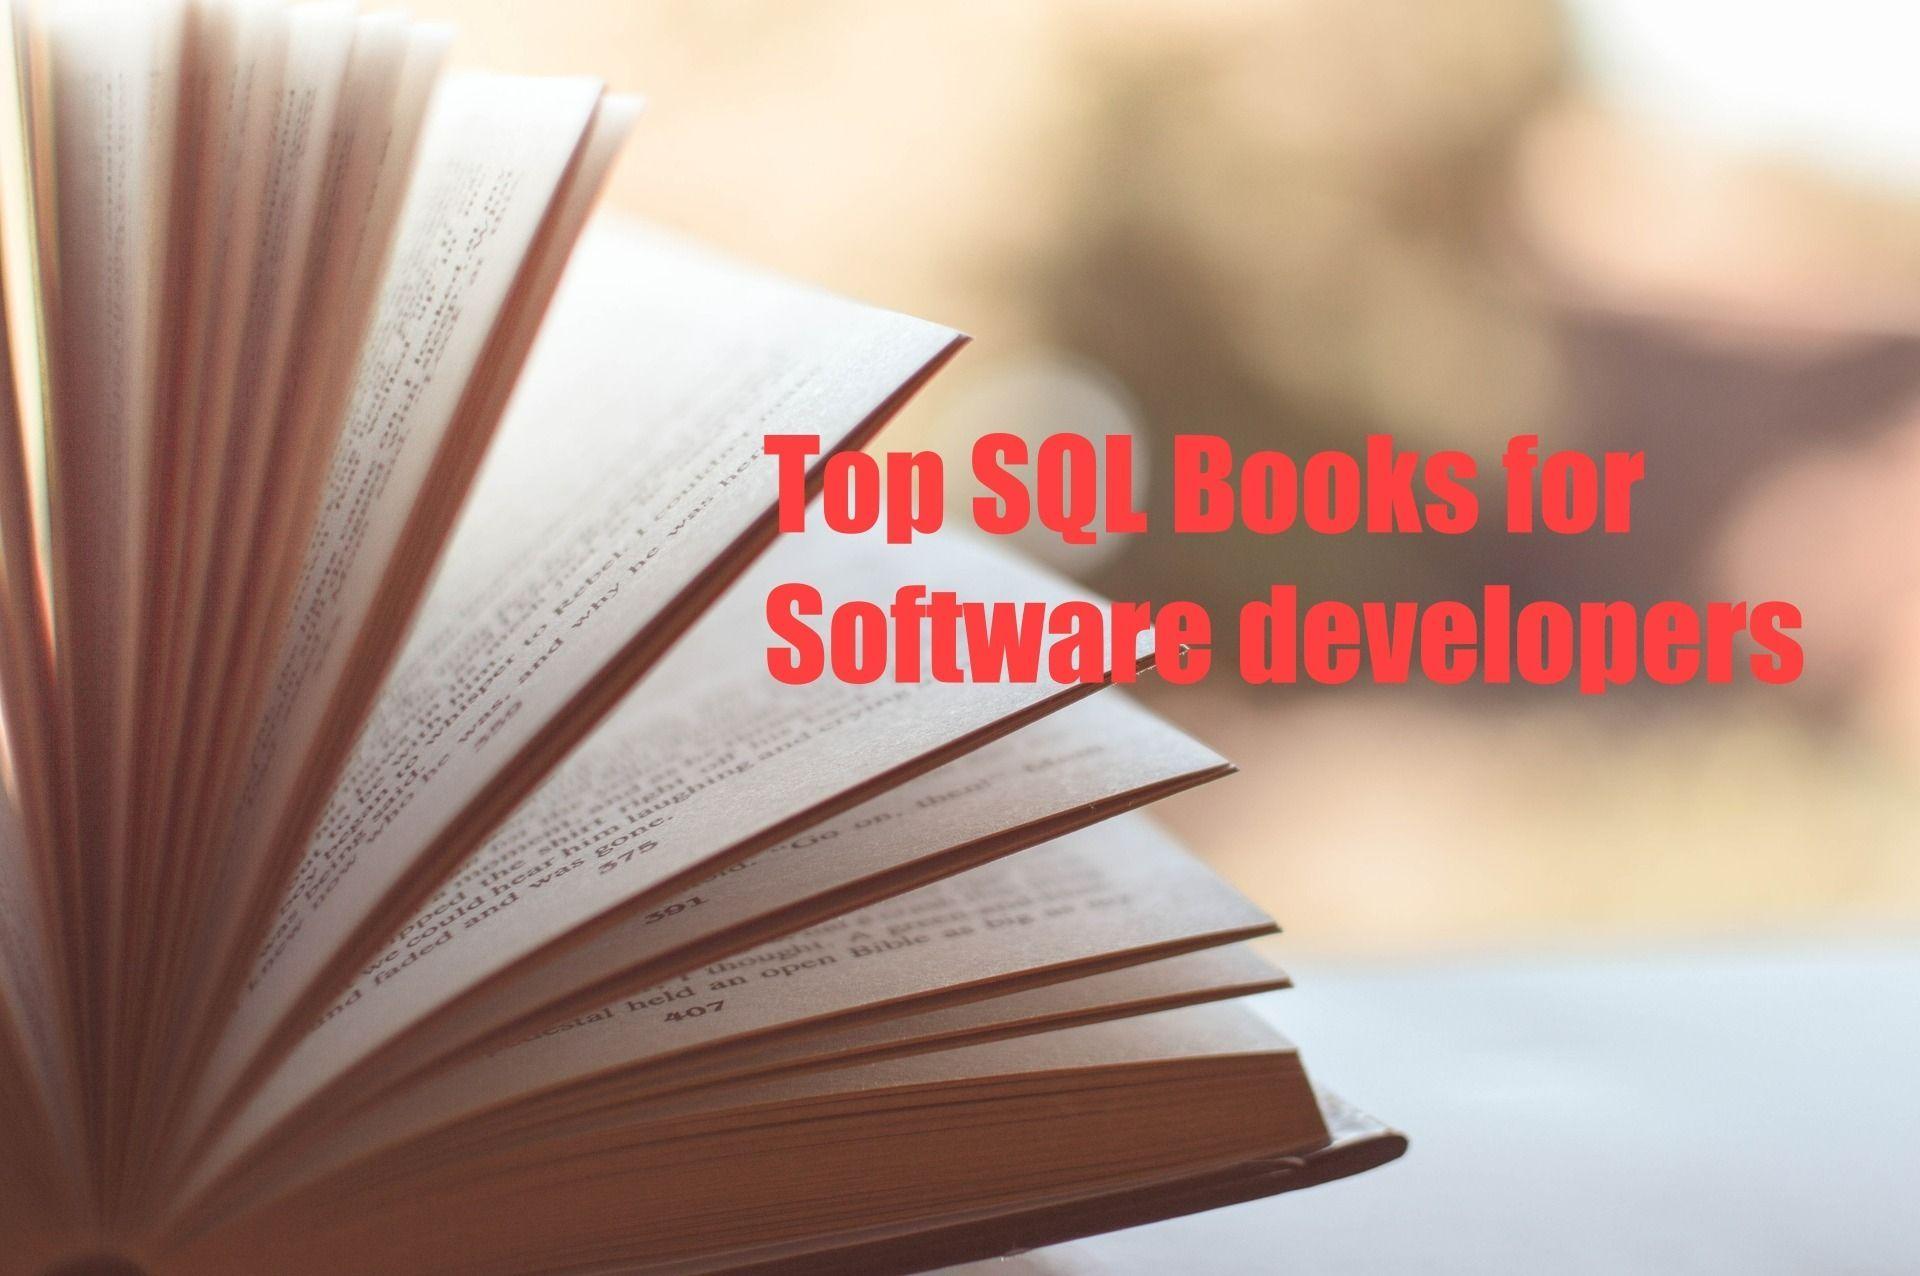 Top SQL books for software developers